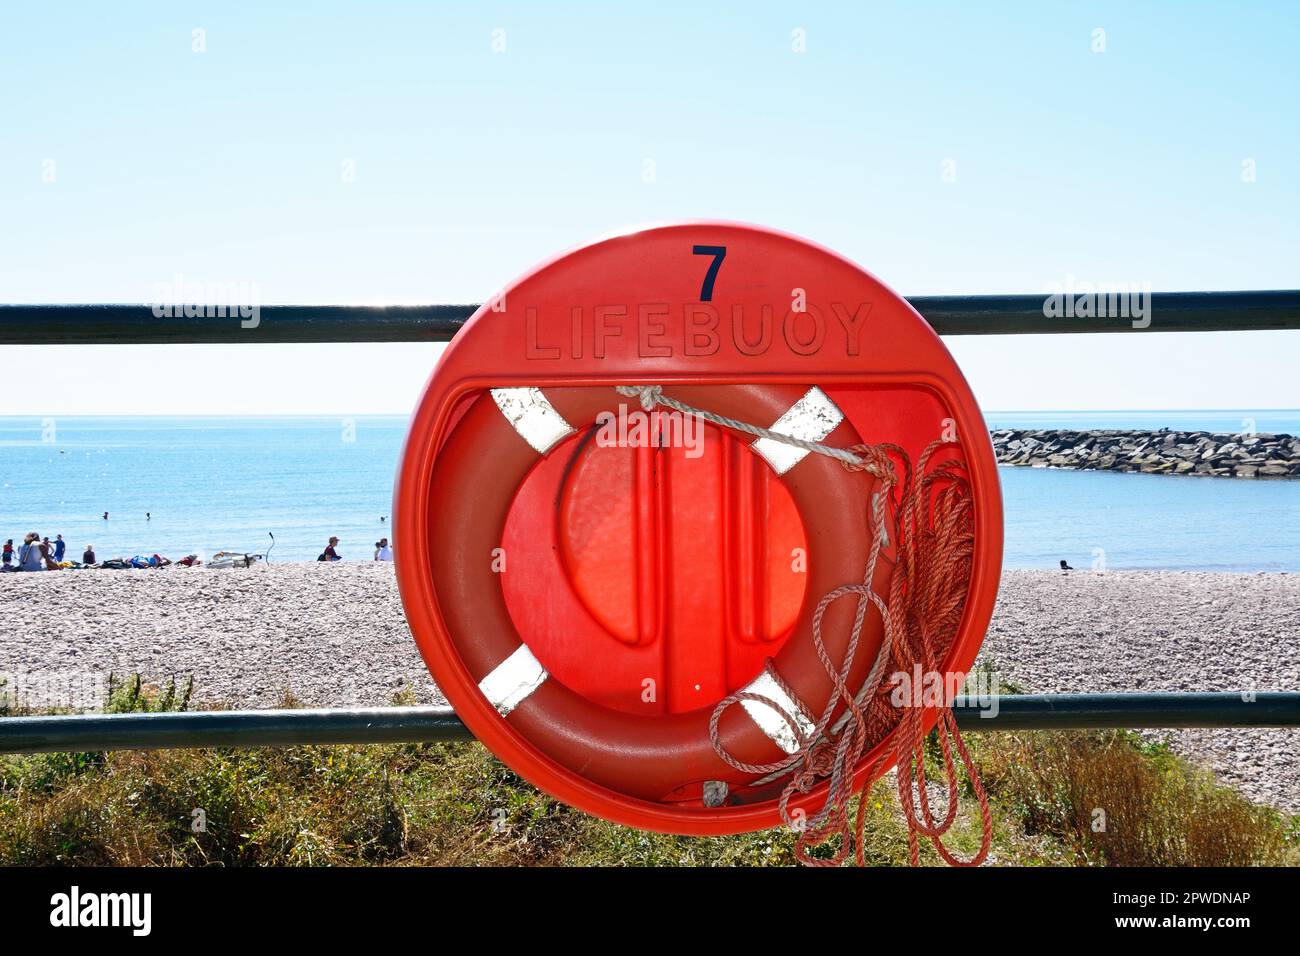 Lifebuoy ring attached to the railings at the edge of the beach with views out to sea, Sidmouth, Devon, UK, Europe. Stock Photo